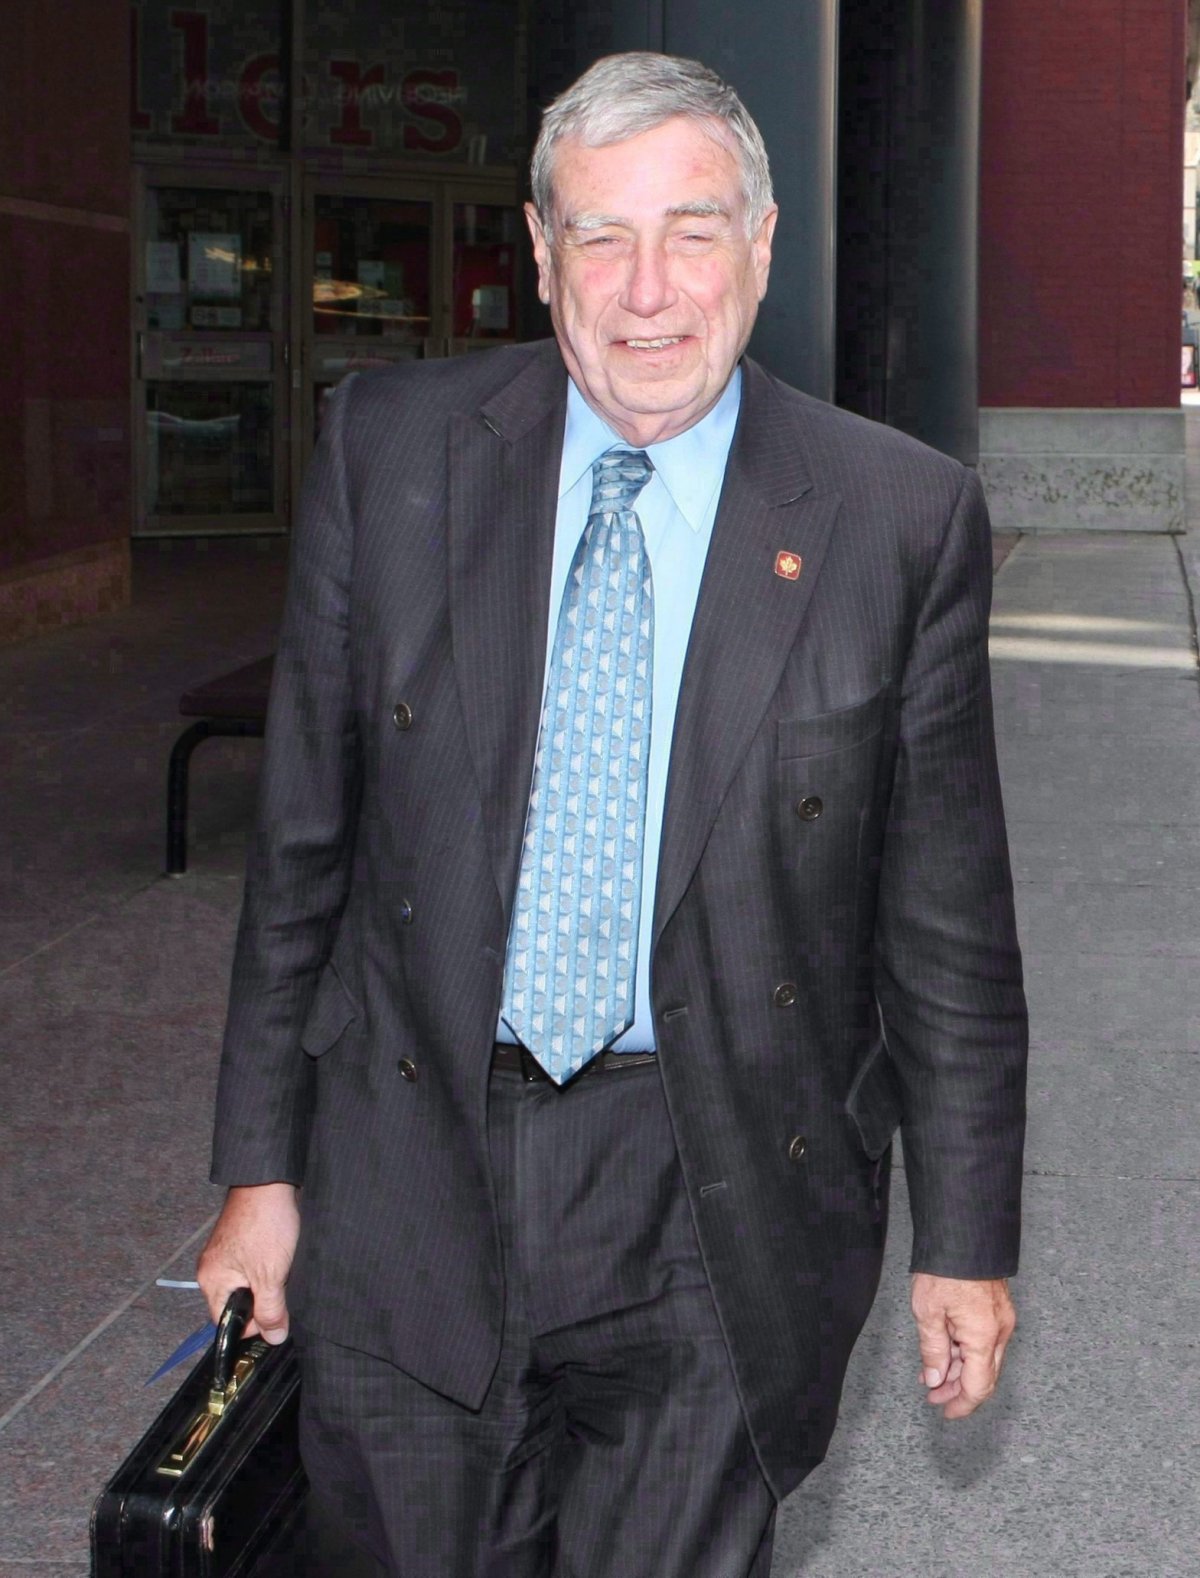 Bruce Carson is shown in Ottawa May 1, 2008. Carson, a former aide to Prime Minister Stephen Harper, will go to trial next summer on influence-peddling charges' THE CANADIAN PRESS/Jake Wright.